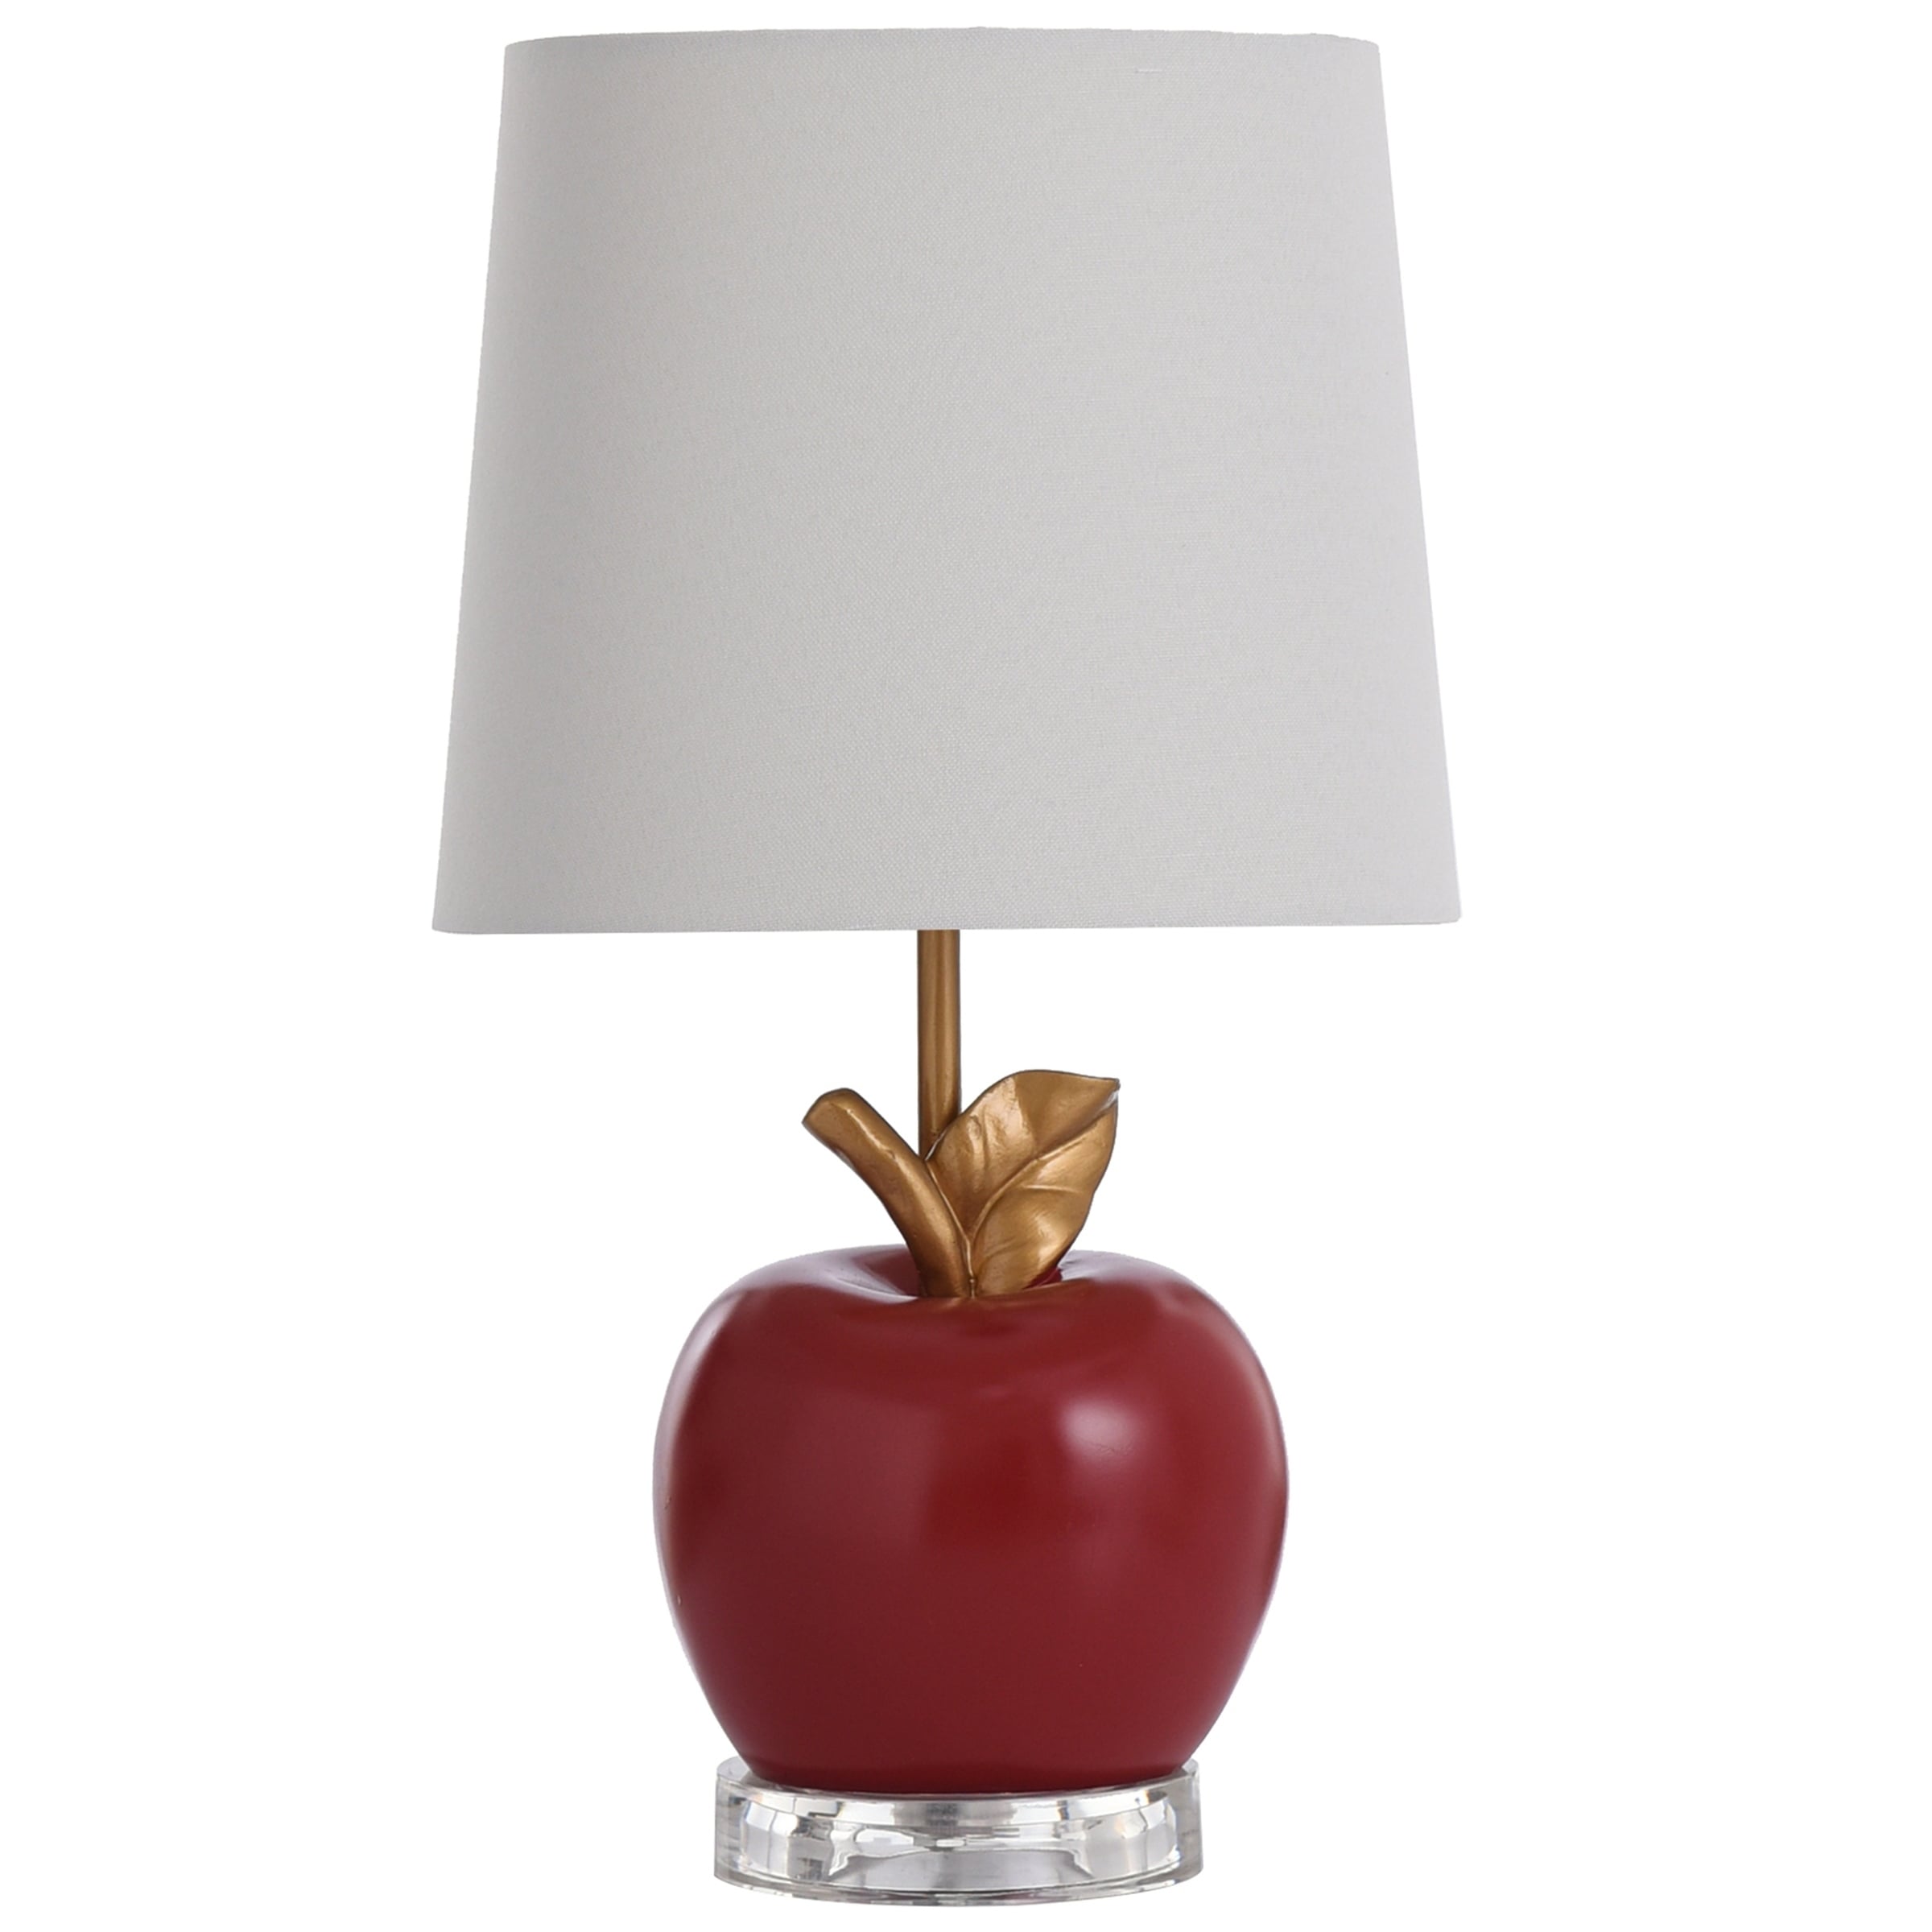 Copper Grove Korce 1-light Red Apple Accent Lamp with Goldtone Leaf and  Stem (As Is Item) - Overstock - 33977041